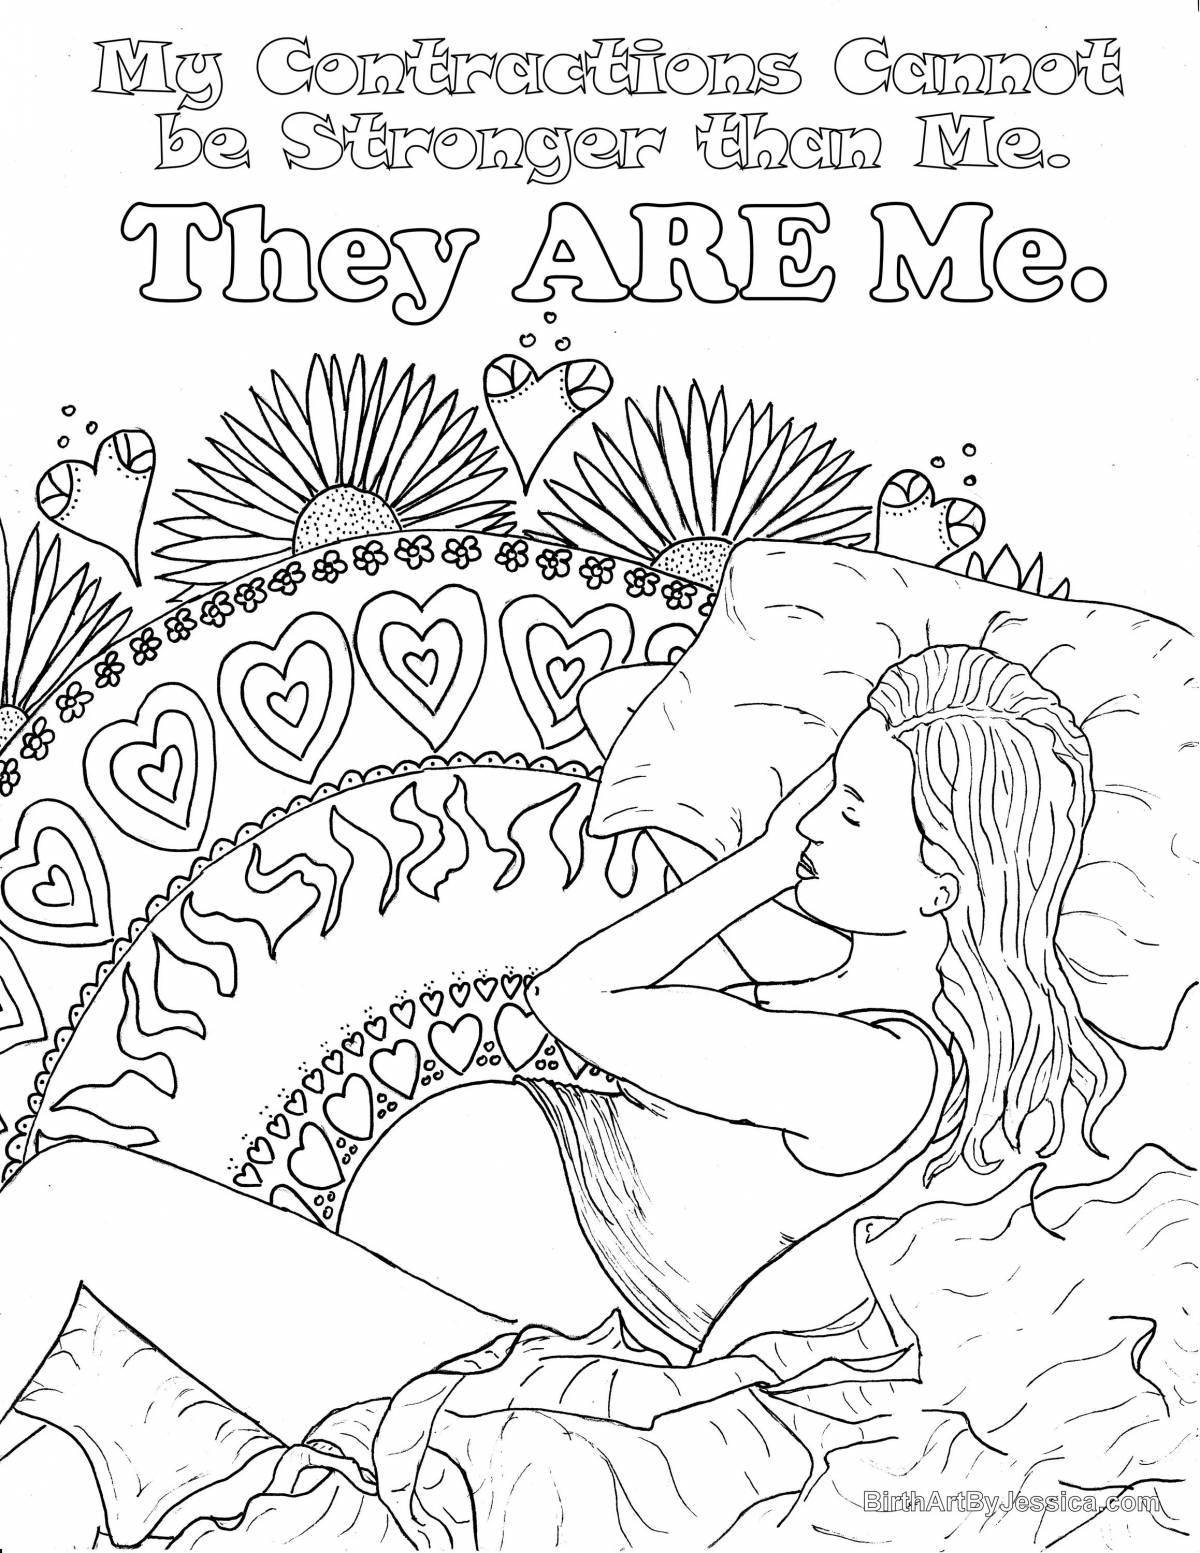 Tempting pregnancy coloring page